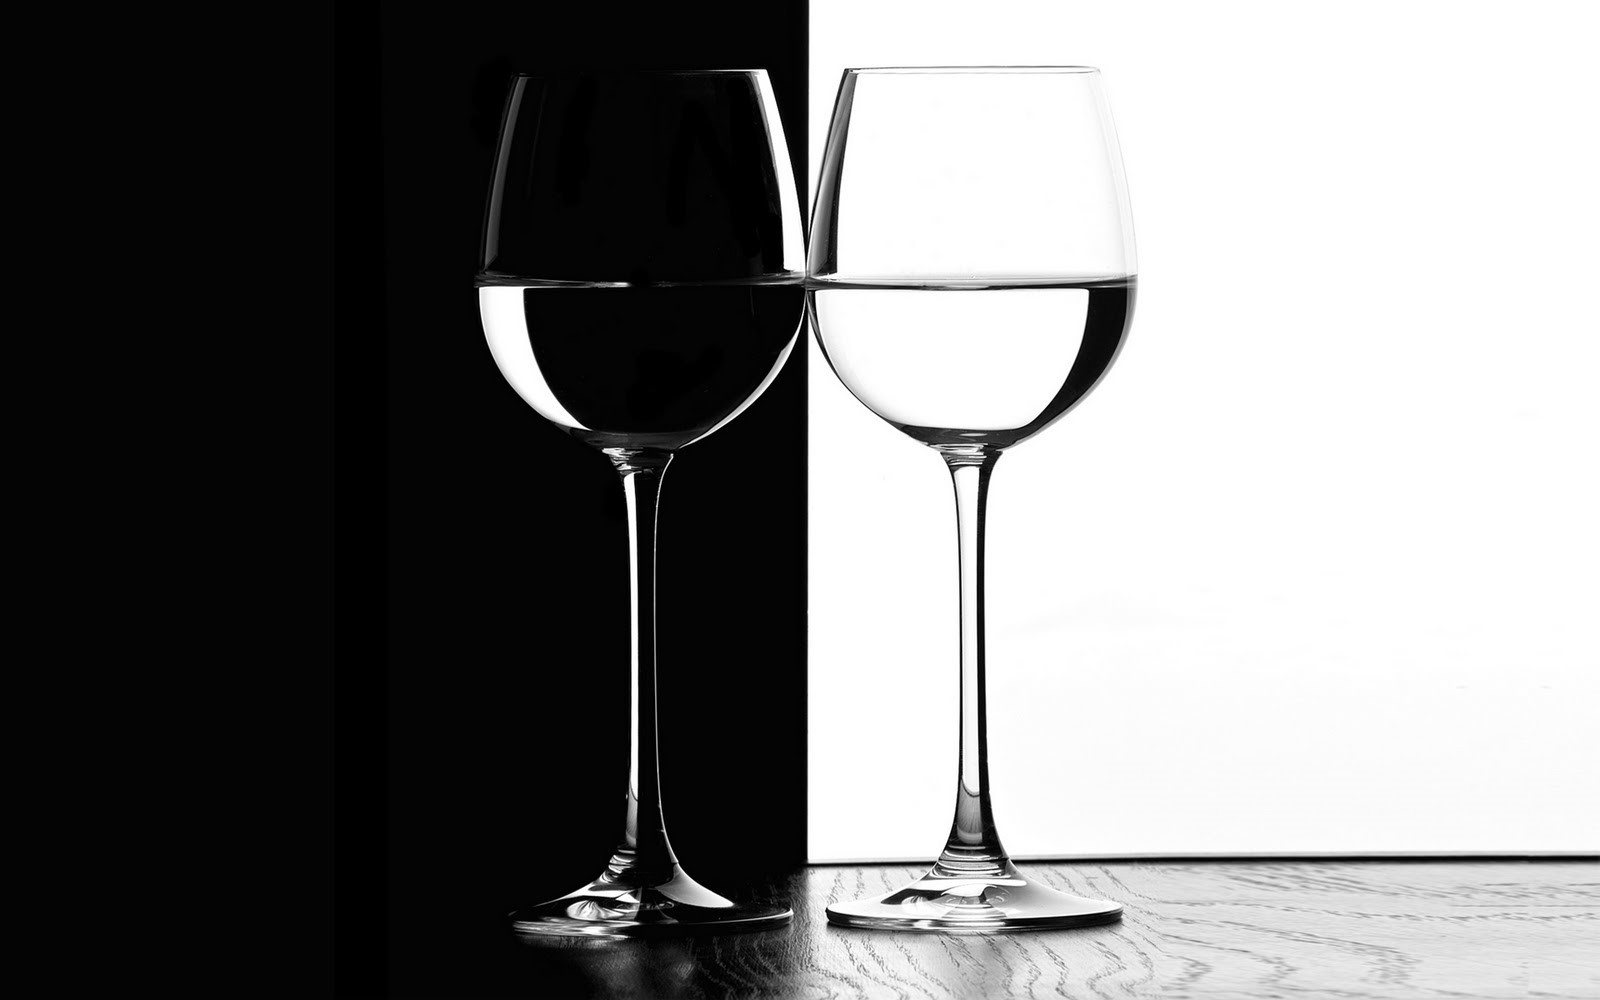 Contrast displayed with wine glasses